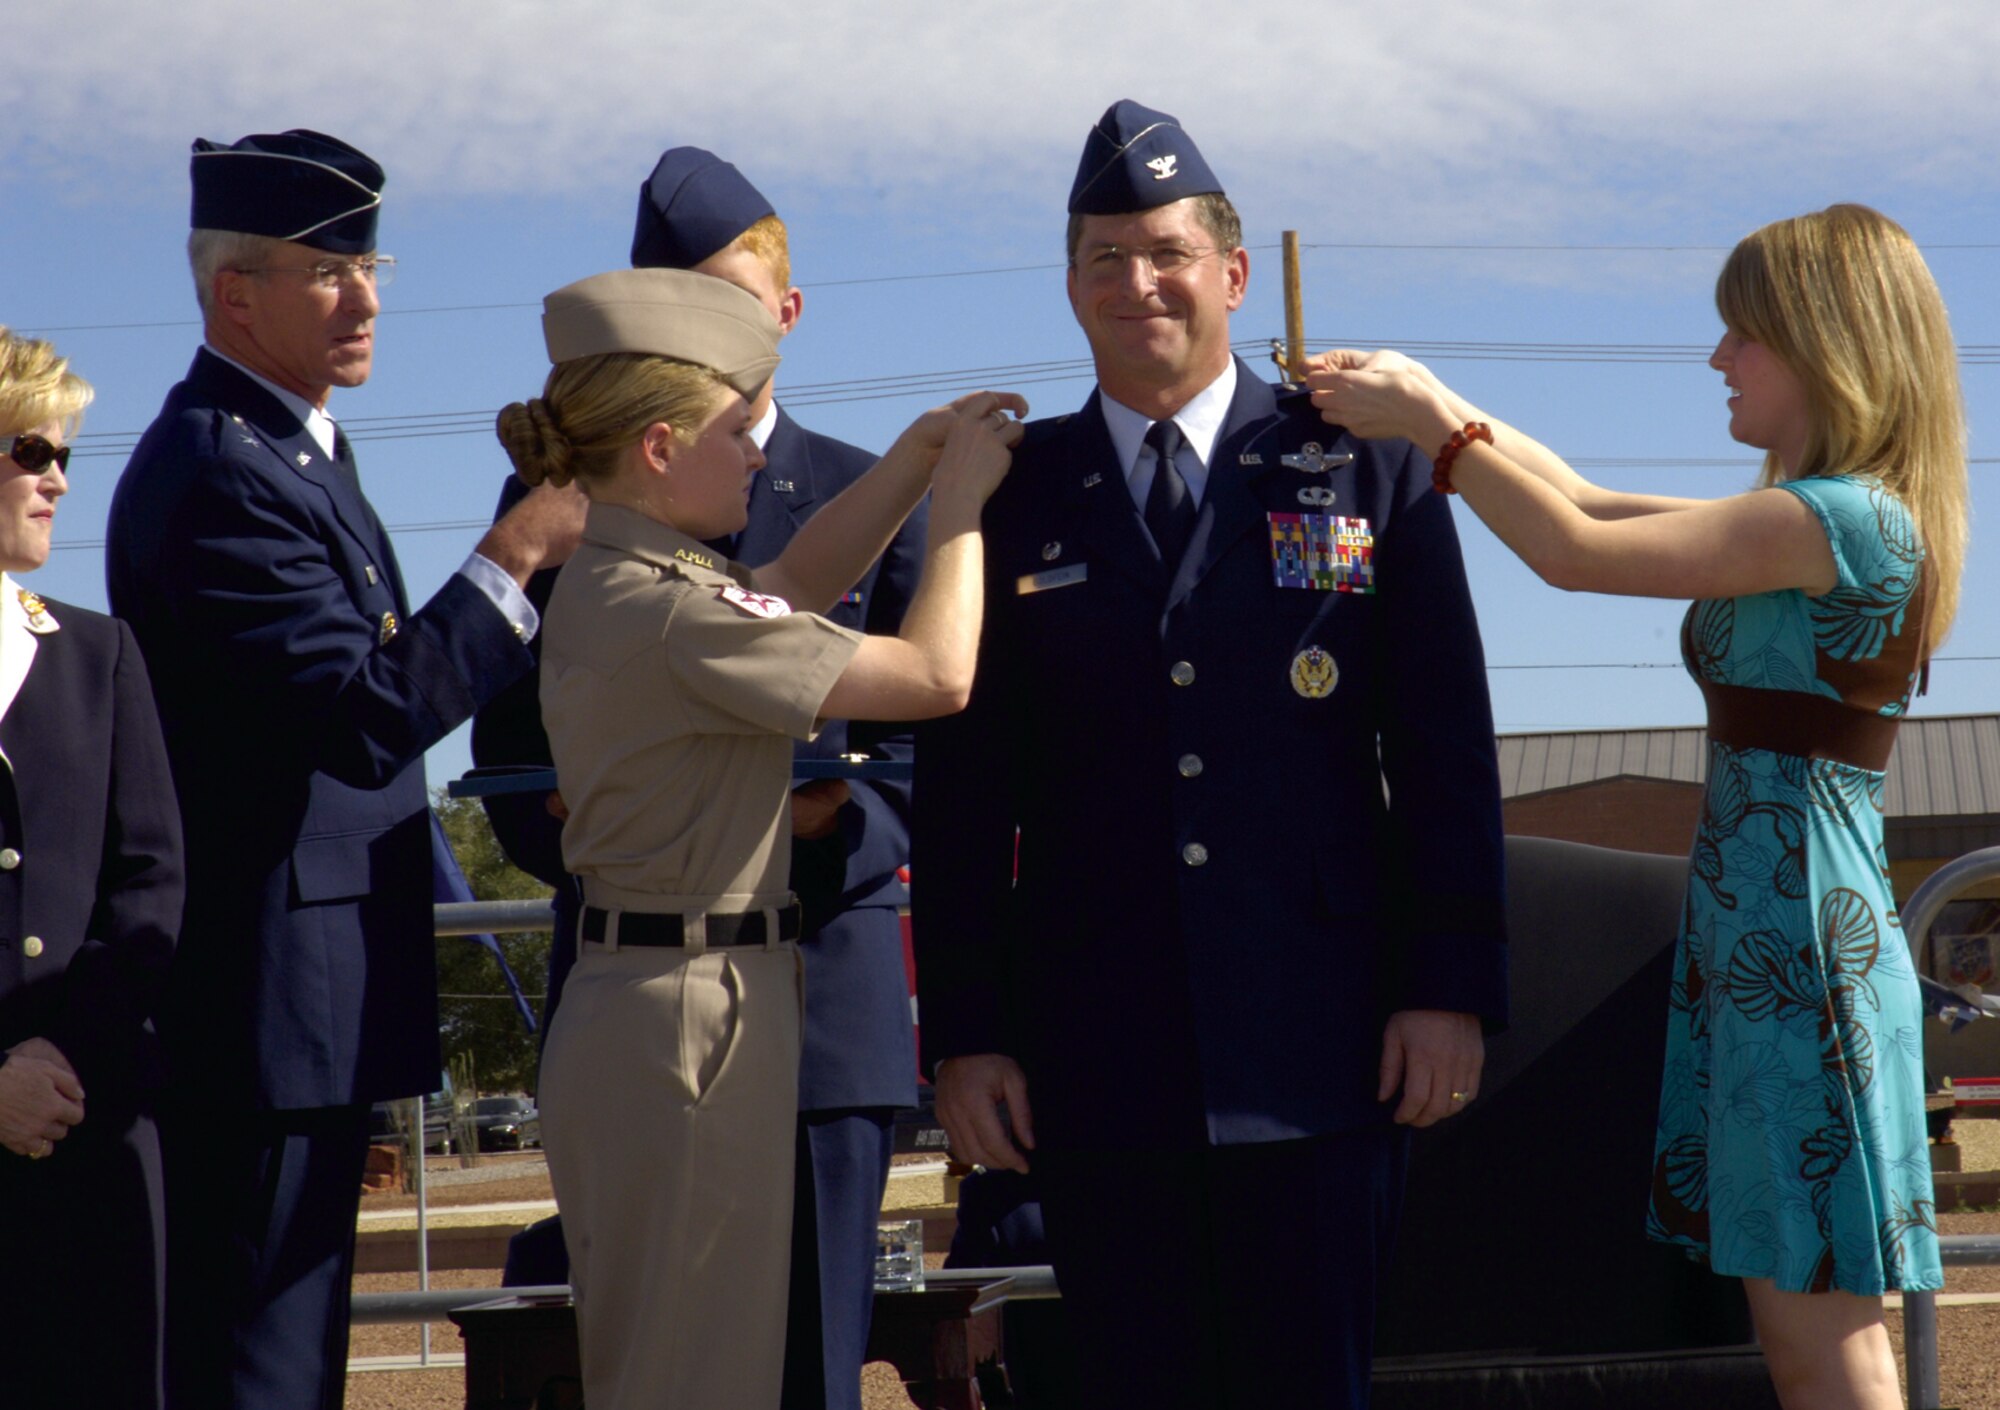 Brig. Gen. David Goldfein, 49th Fighter Wing commander, is pinned on by his two daughters, Danielle and Diana Goldfein, during his promotion ceremony Oct. 13 at Heritage Park.